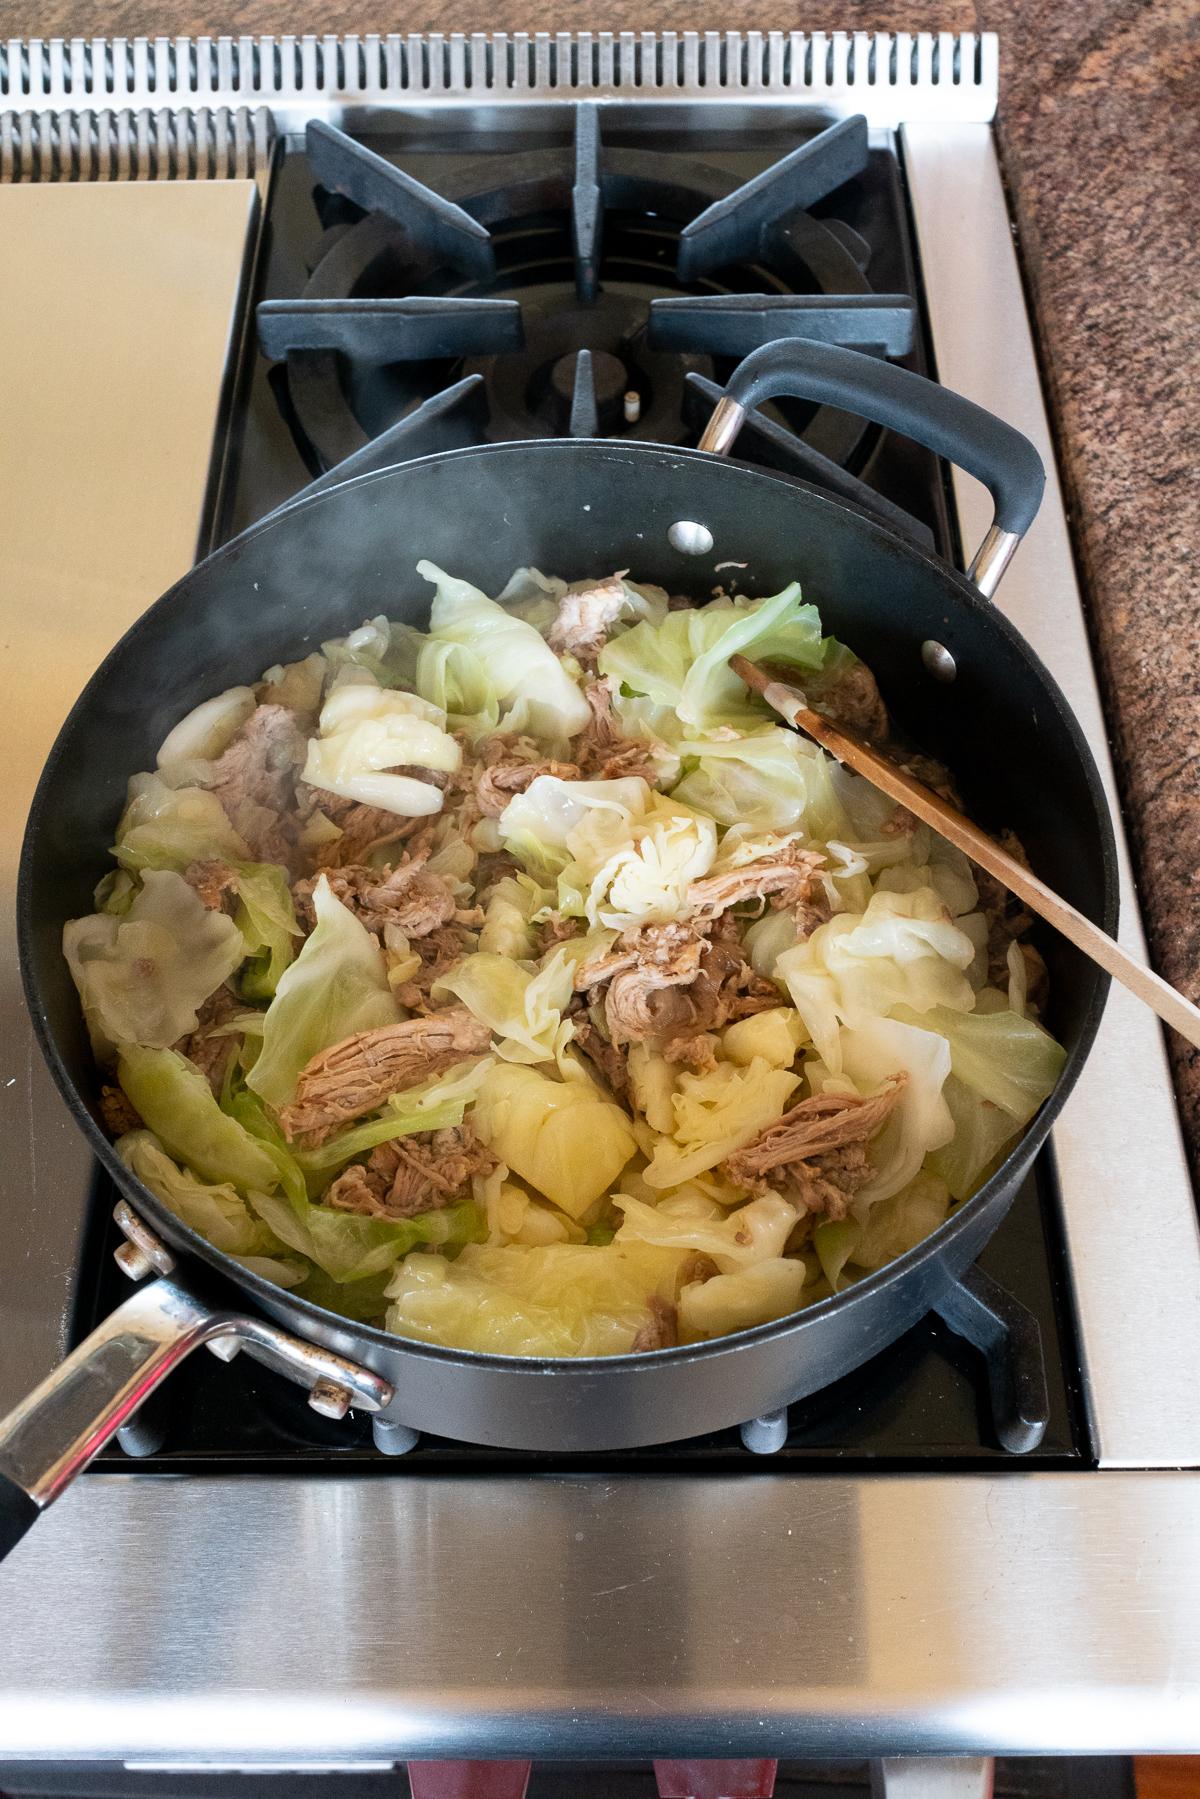 Cooking down the kalua pork and cabbage in a saucepan with kalua pork drippings/juices